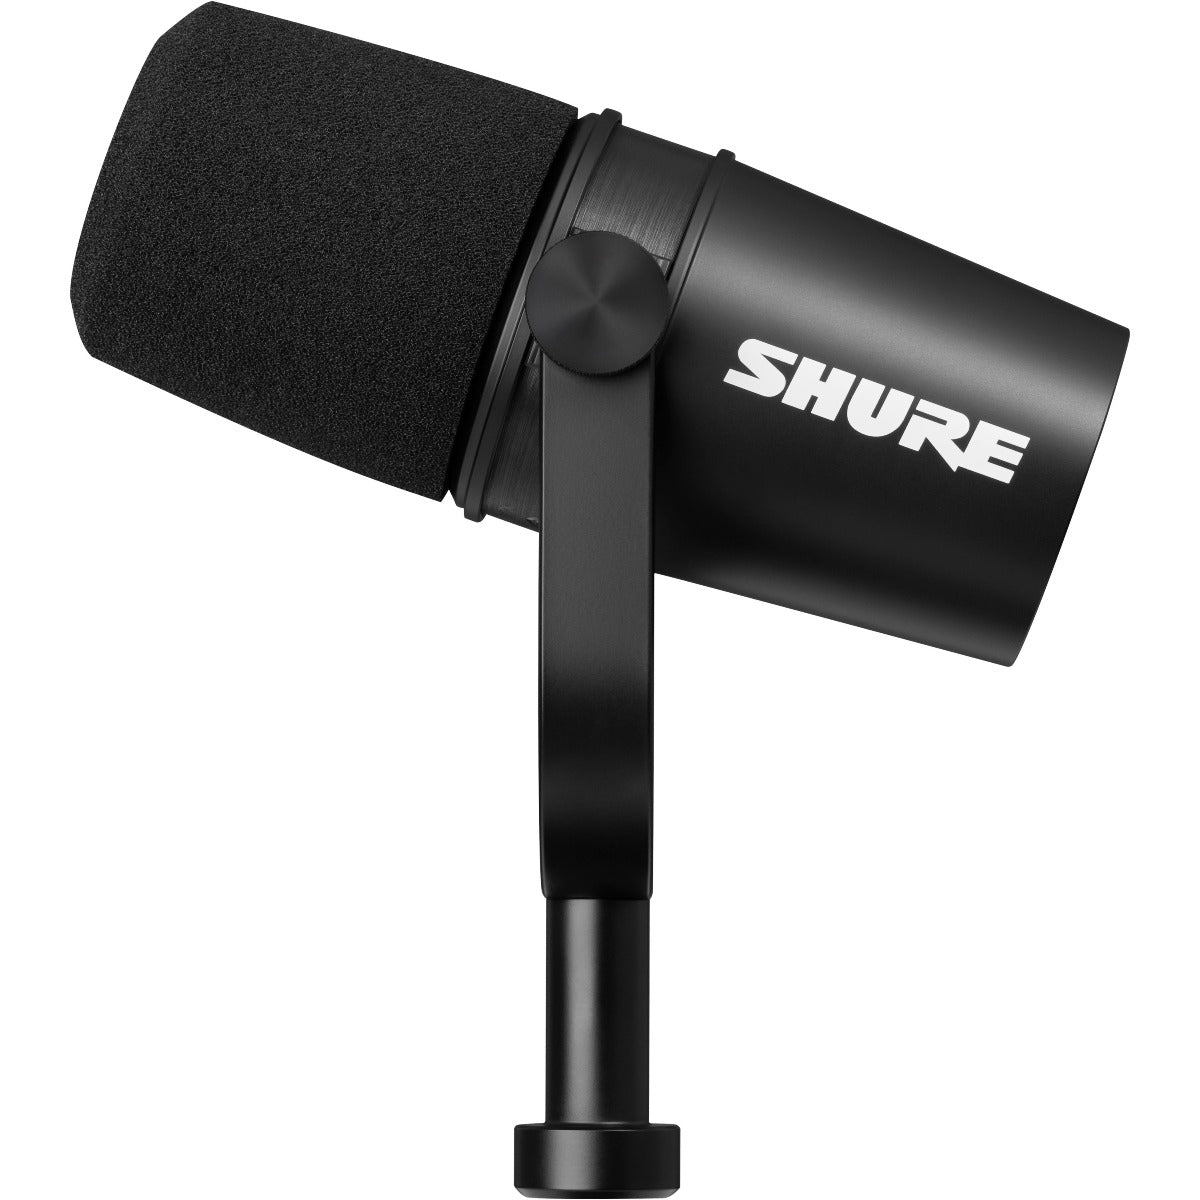 Shure MV7X Podcast Microphone View 2